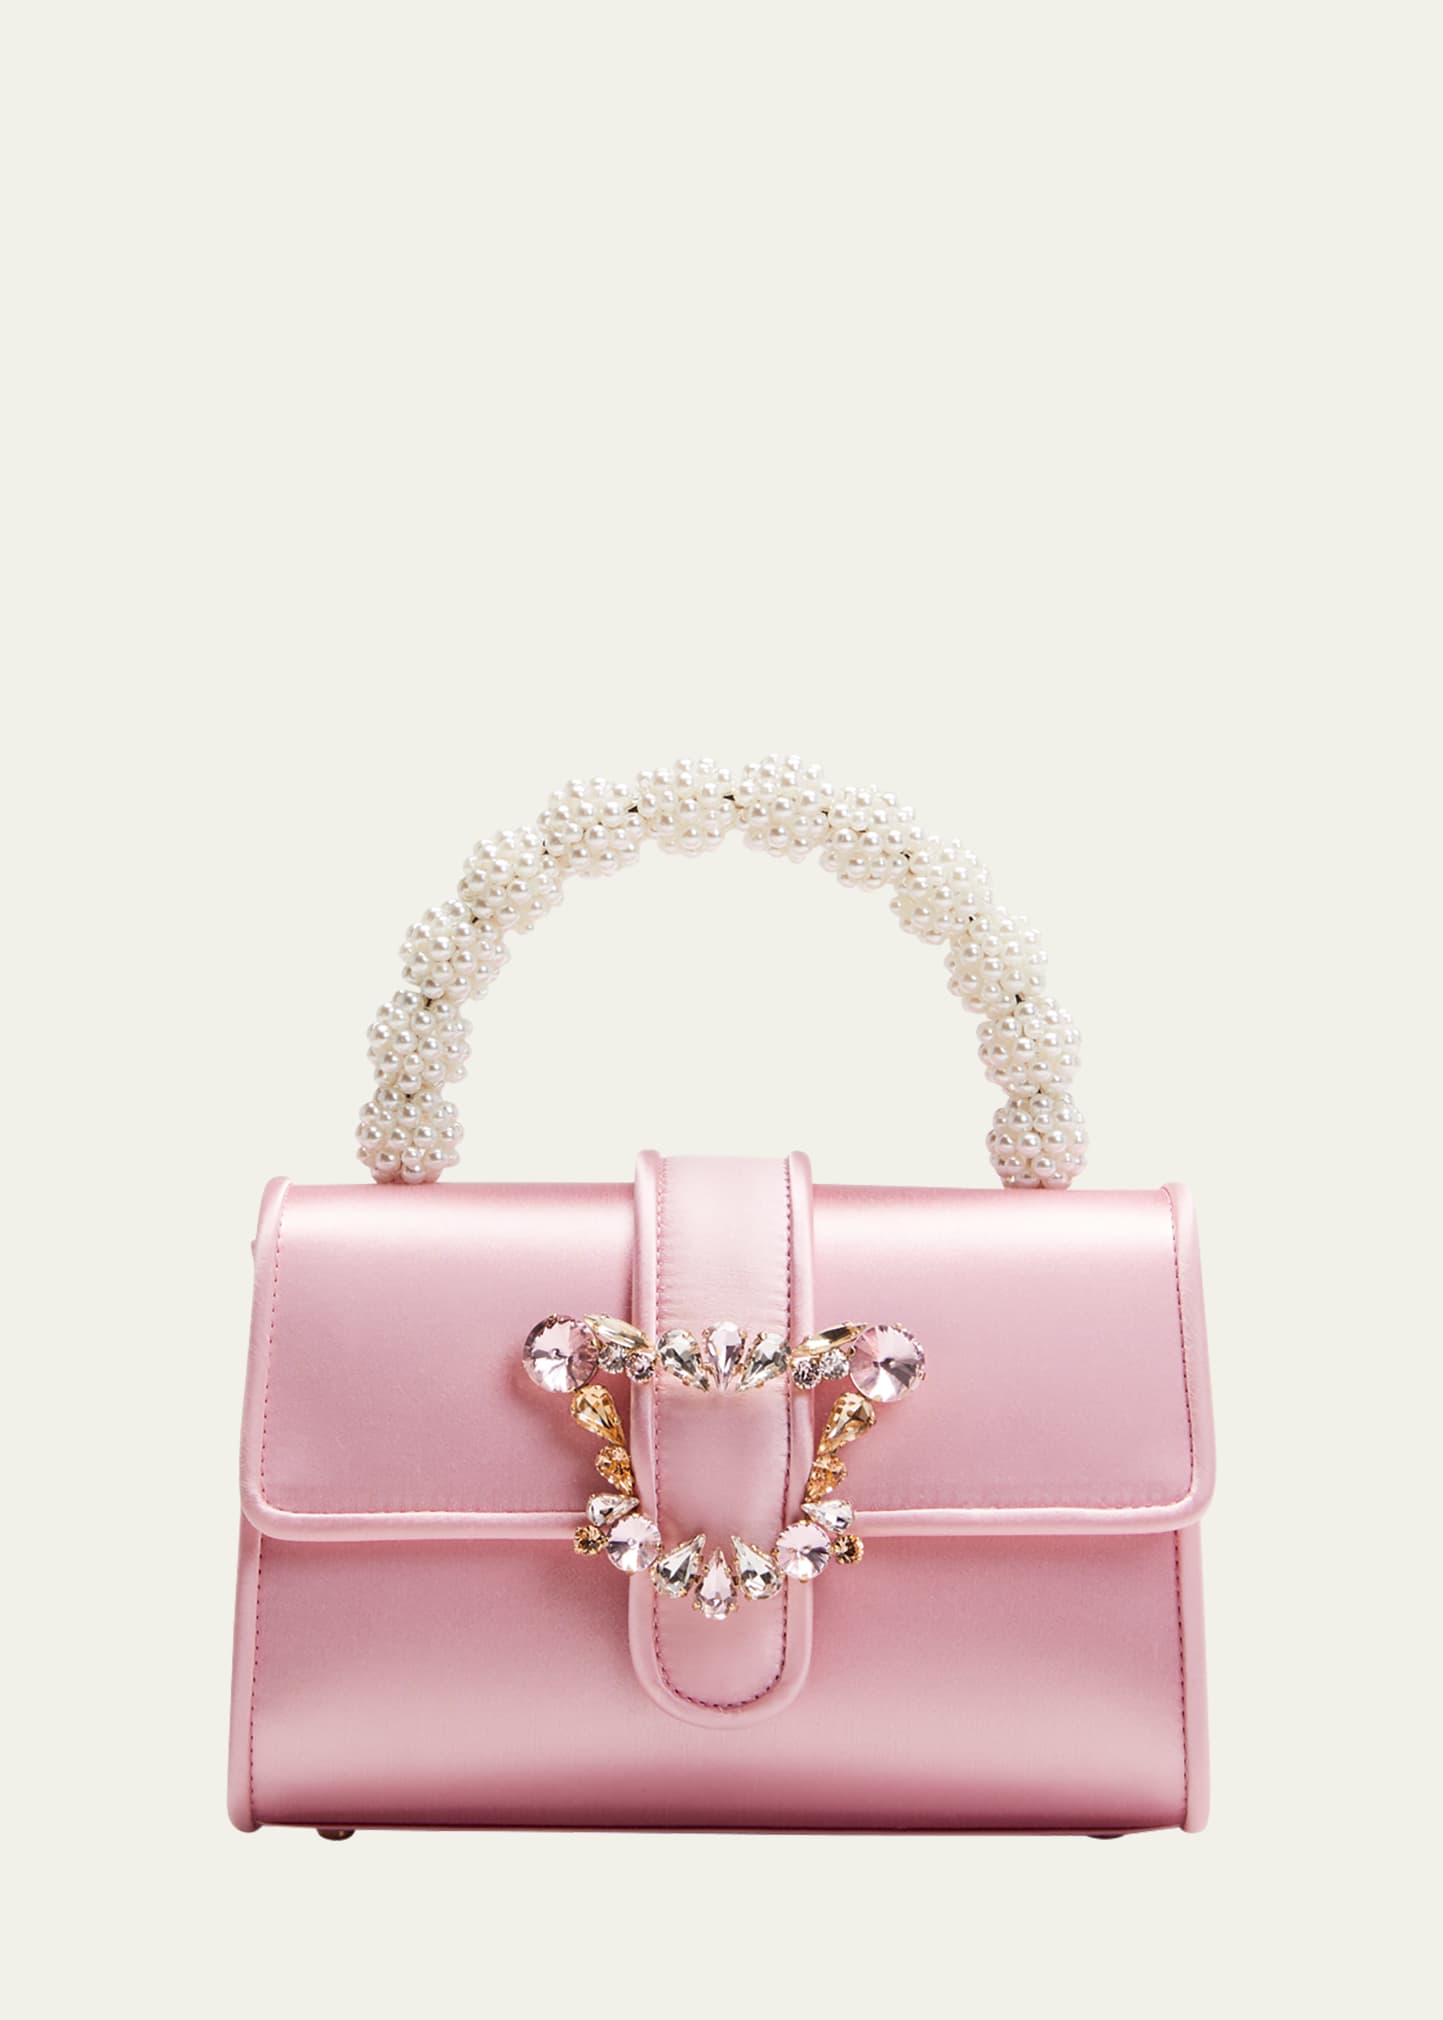 Sophia Webster Margaux Pearly Satin Top-handle Bag In Blossom